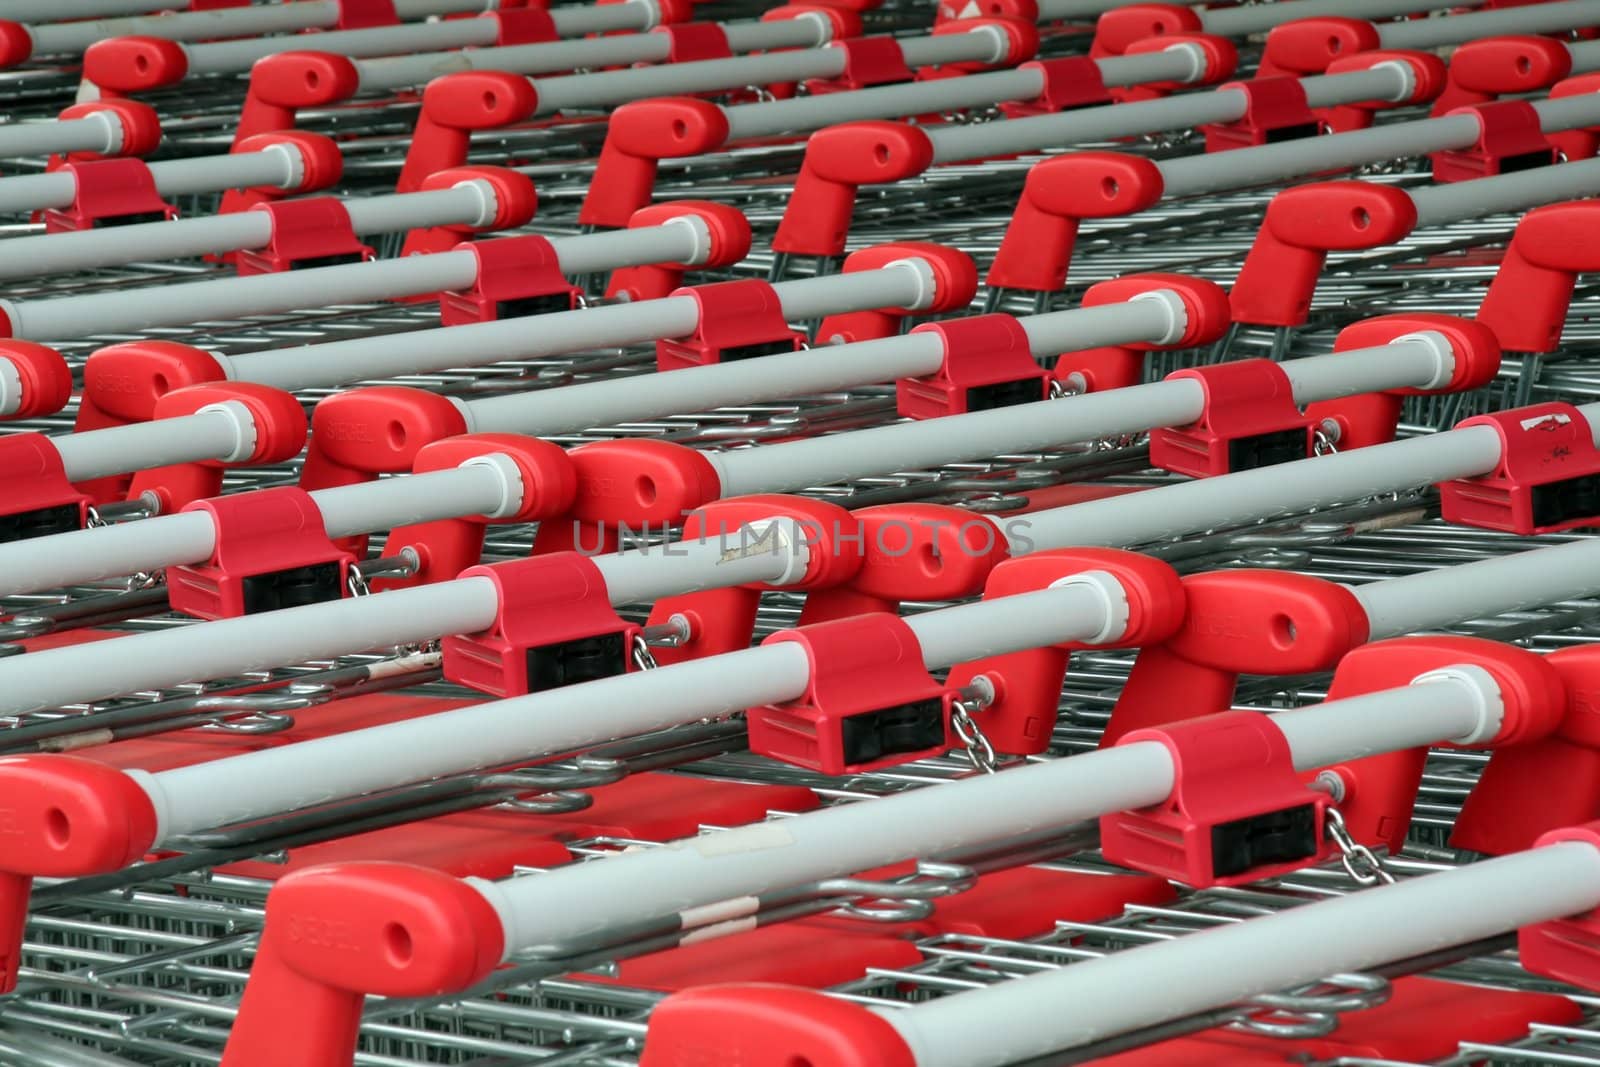 parked shopping trolleys, red and grey color